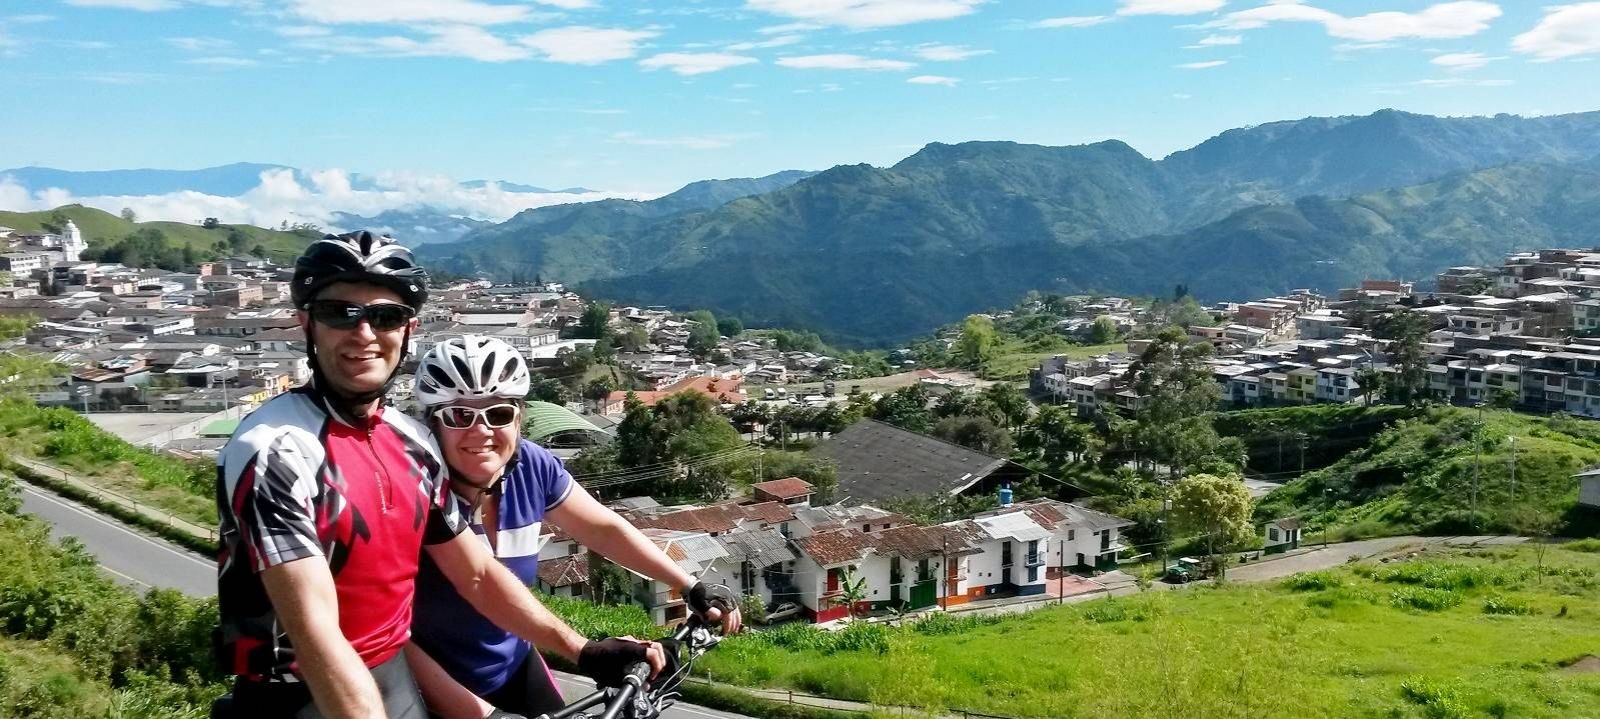 Why Have Cycling Holidays Become So Popular?